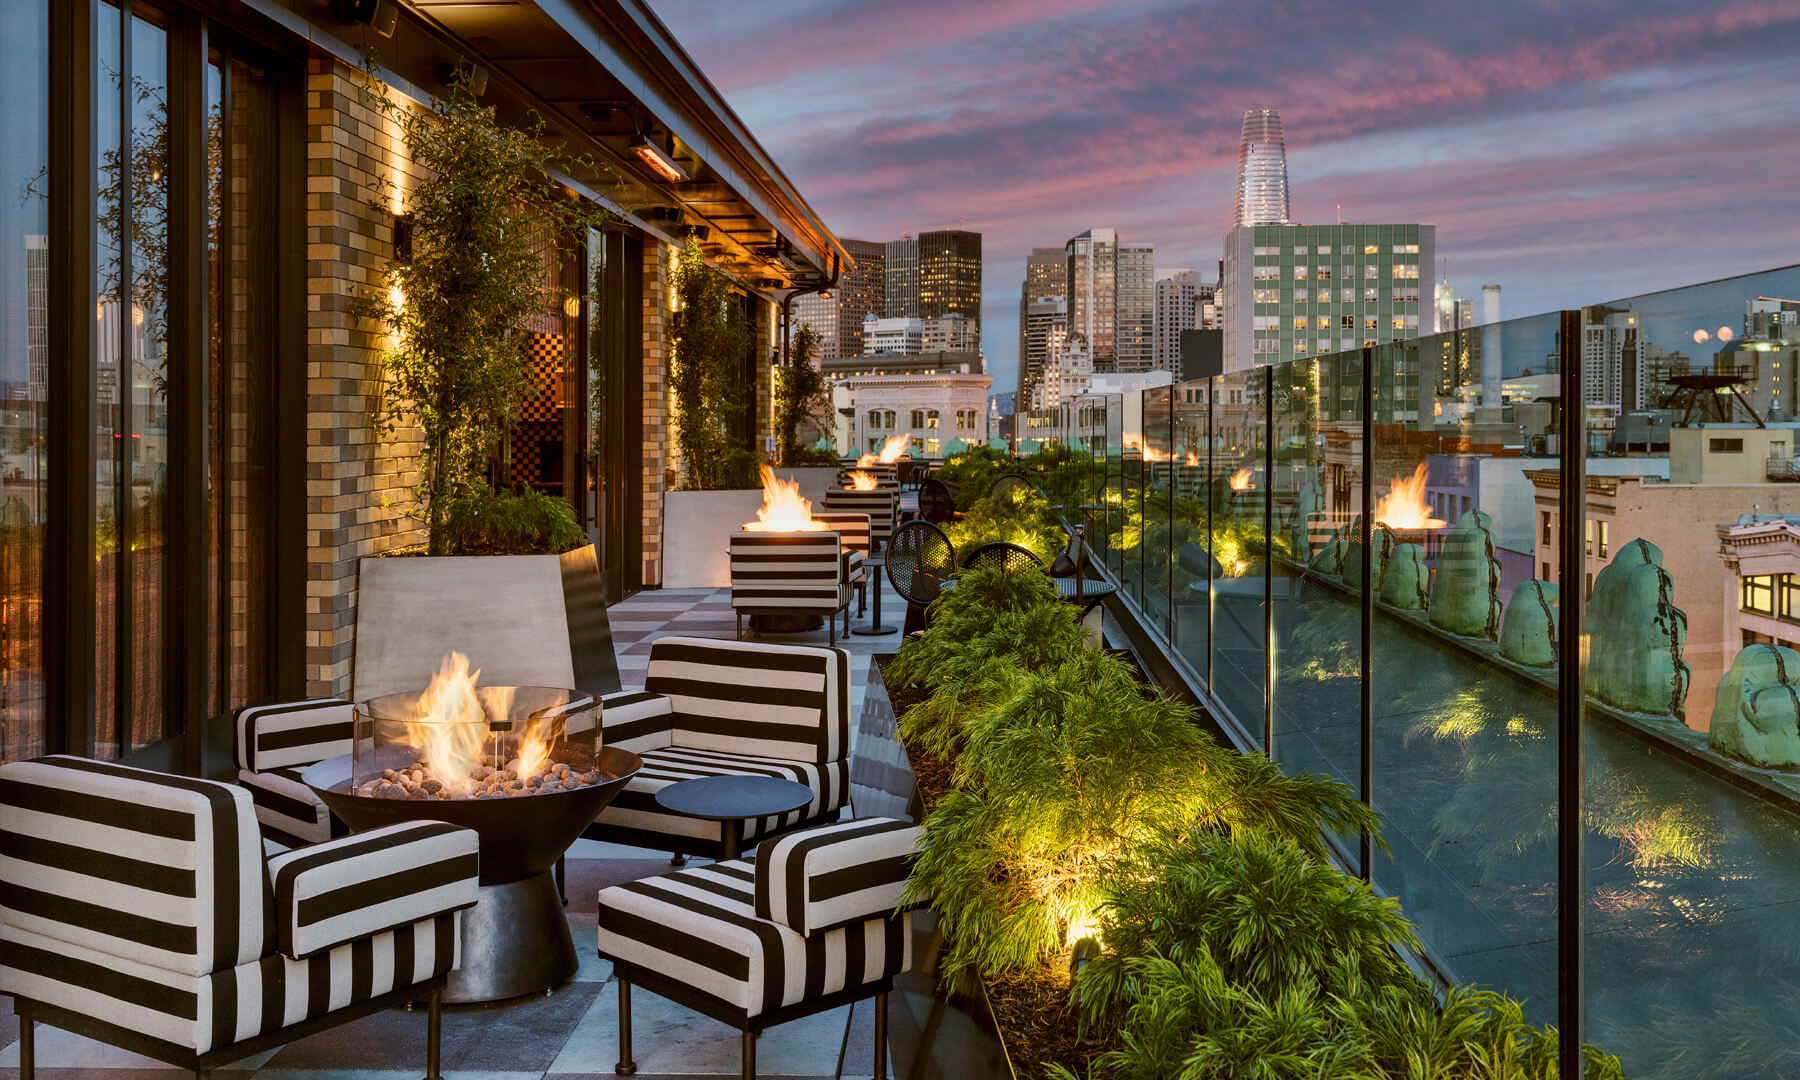 Charmaine's Rooftop Bar & Lounge night view with sunset and city skyline